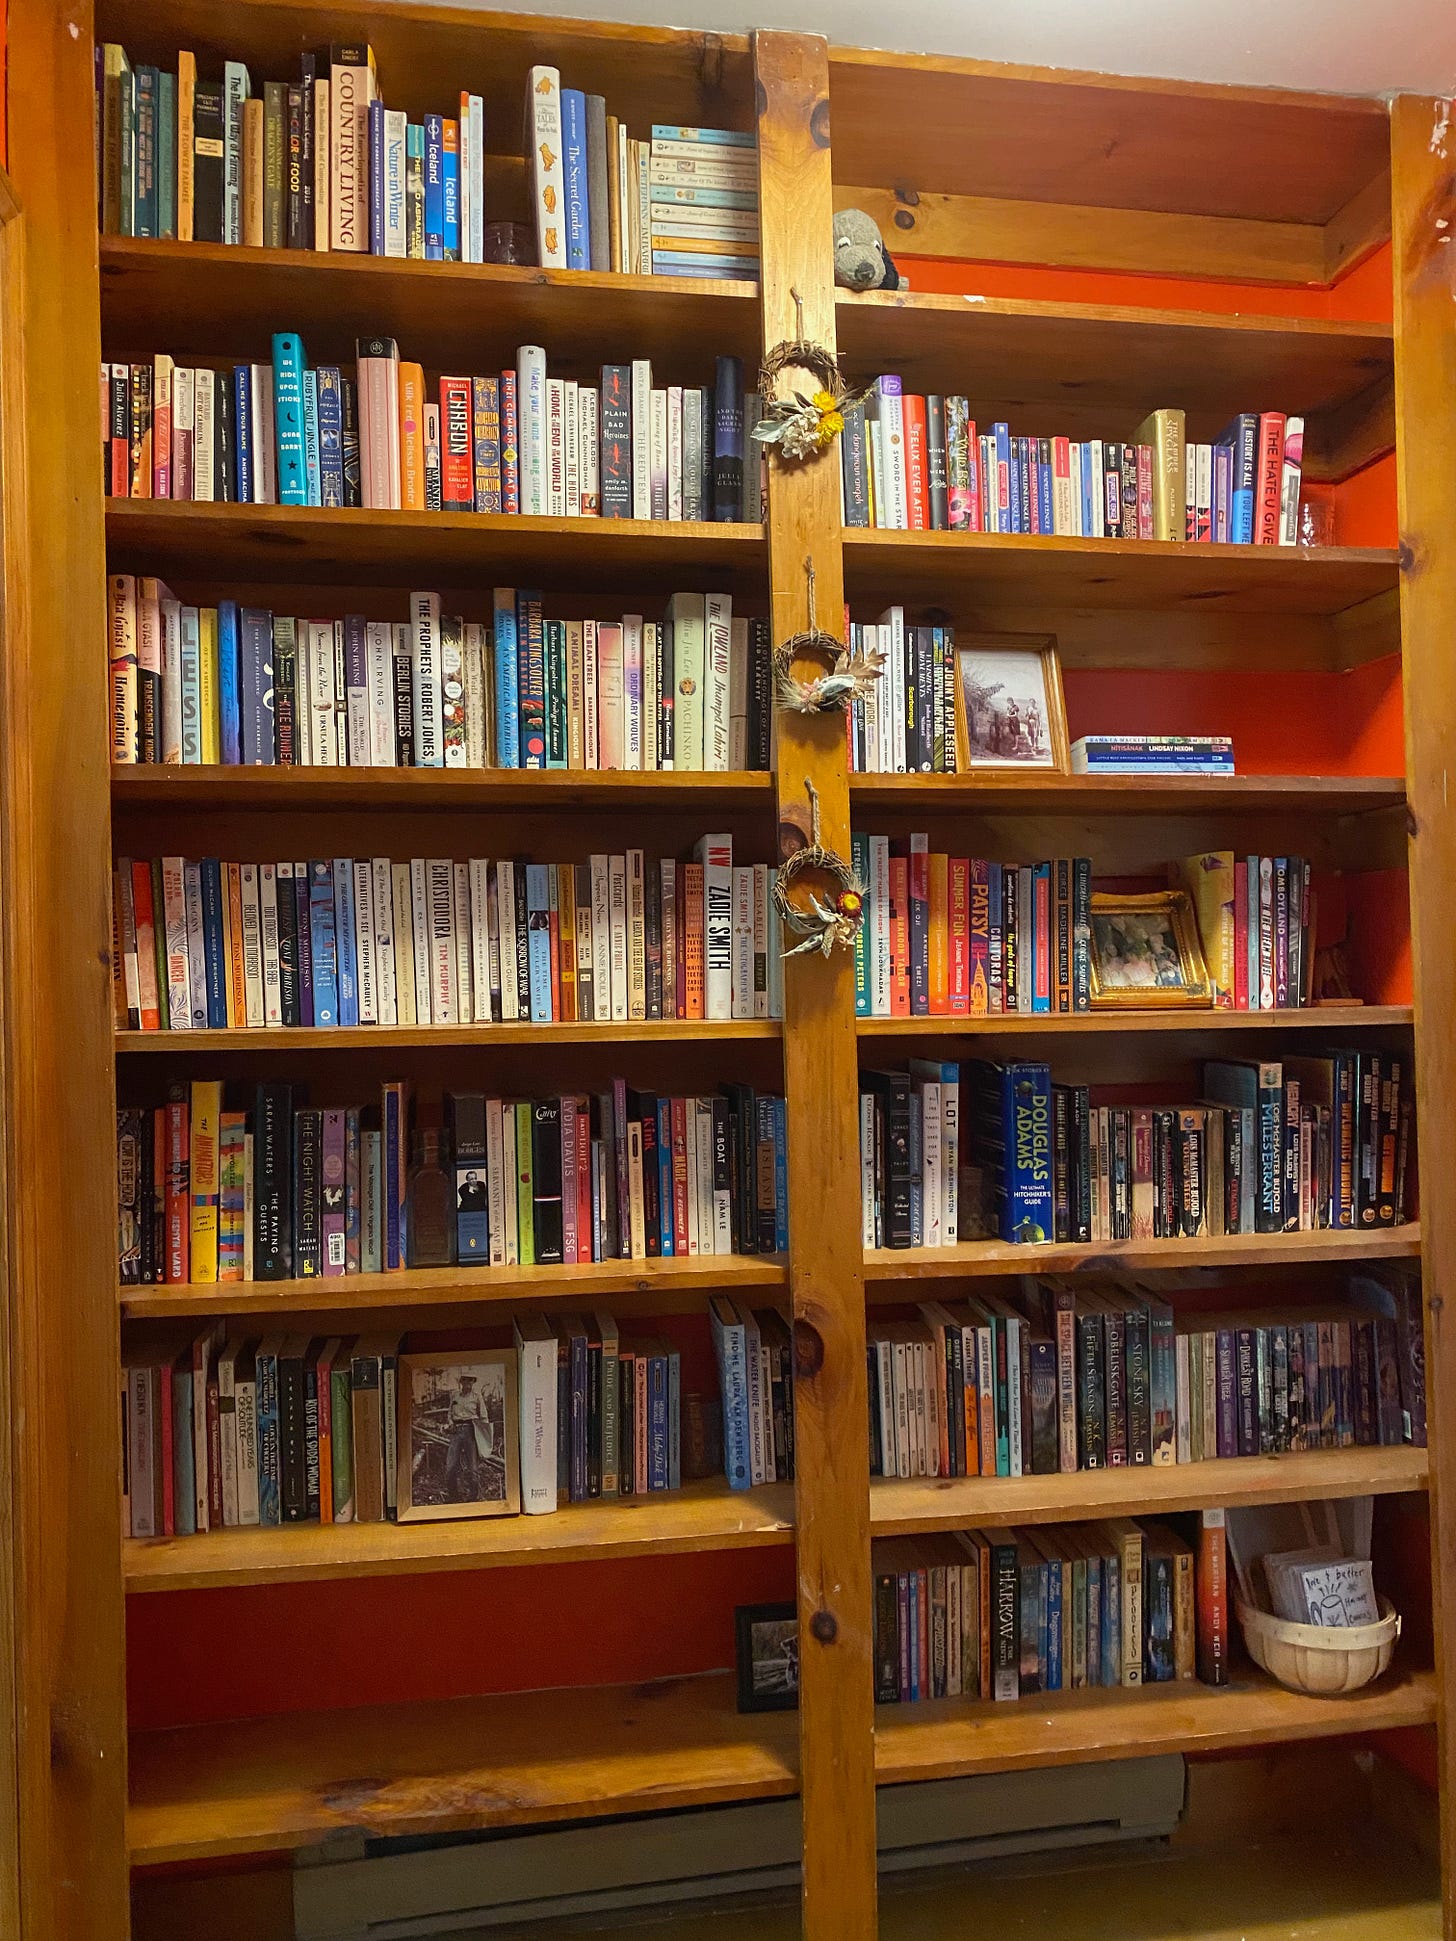 Two tall built in bookcases filled with books. A few of the top and bottom shelves are empty. Small dried flower wreathes hang on the wooden divider between the two shelves. Several photos are scattered among the books.